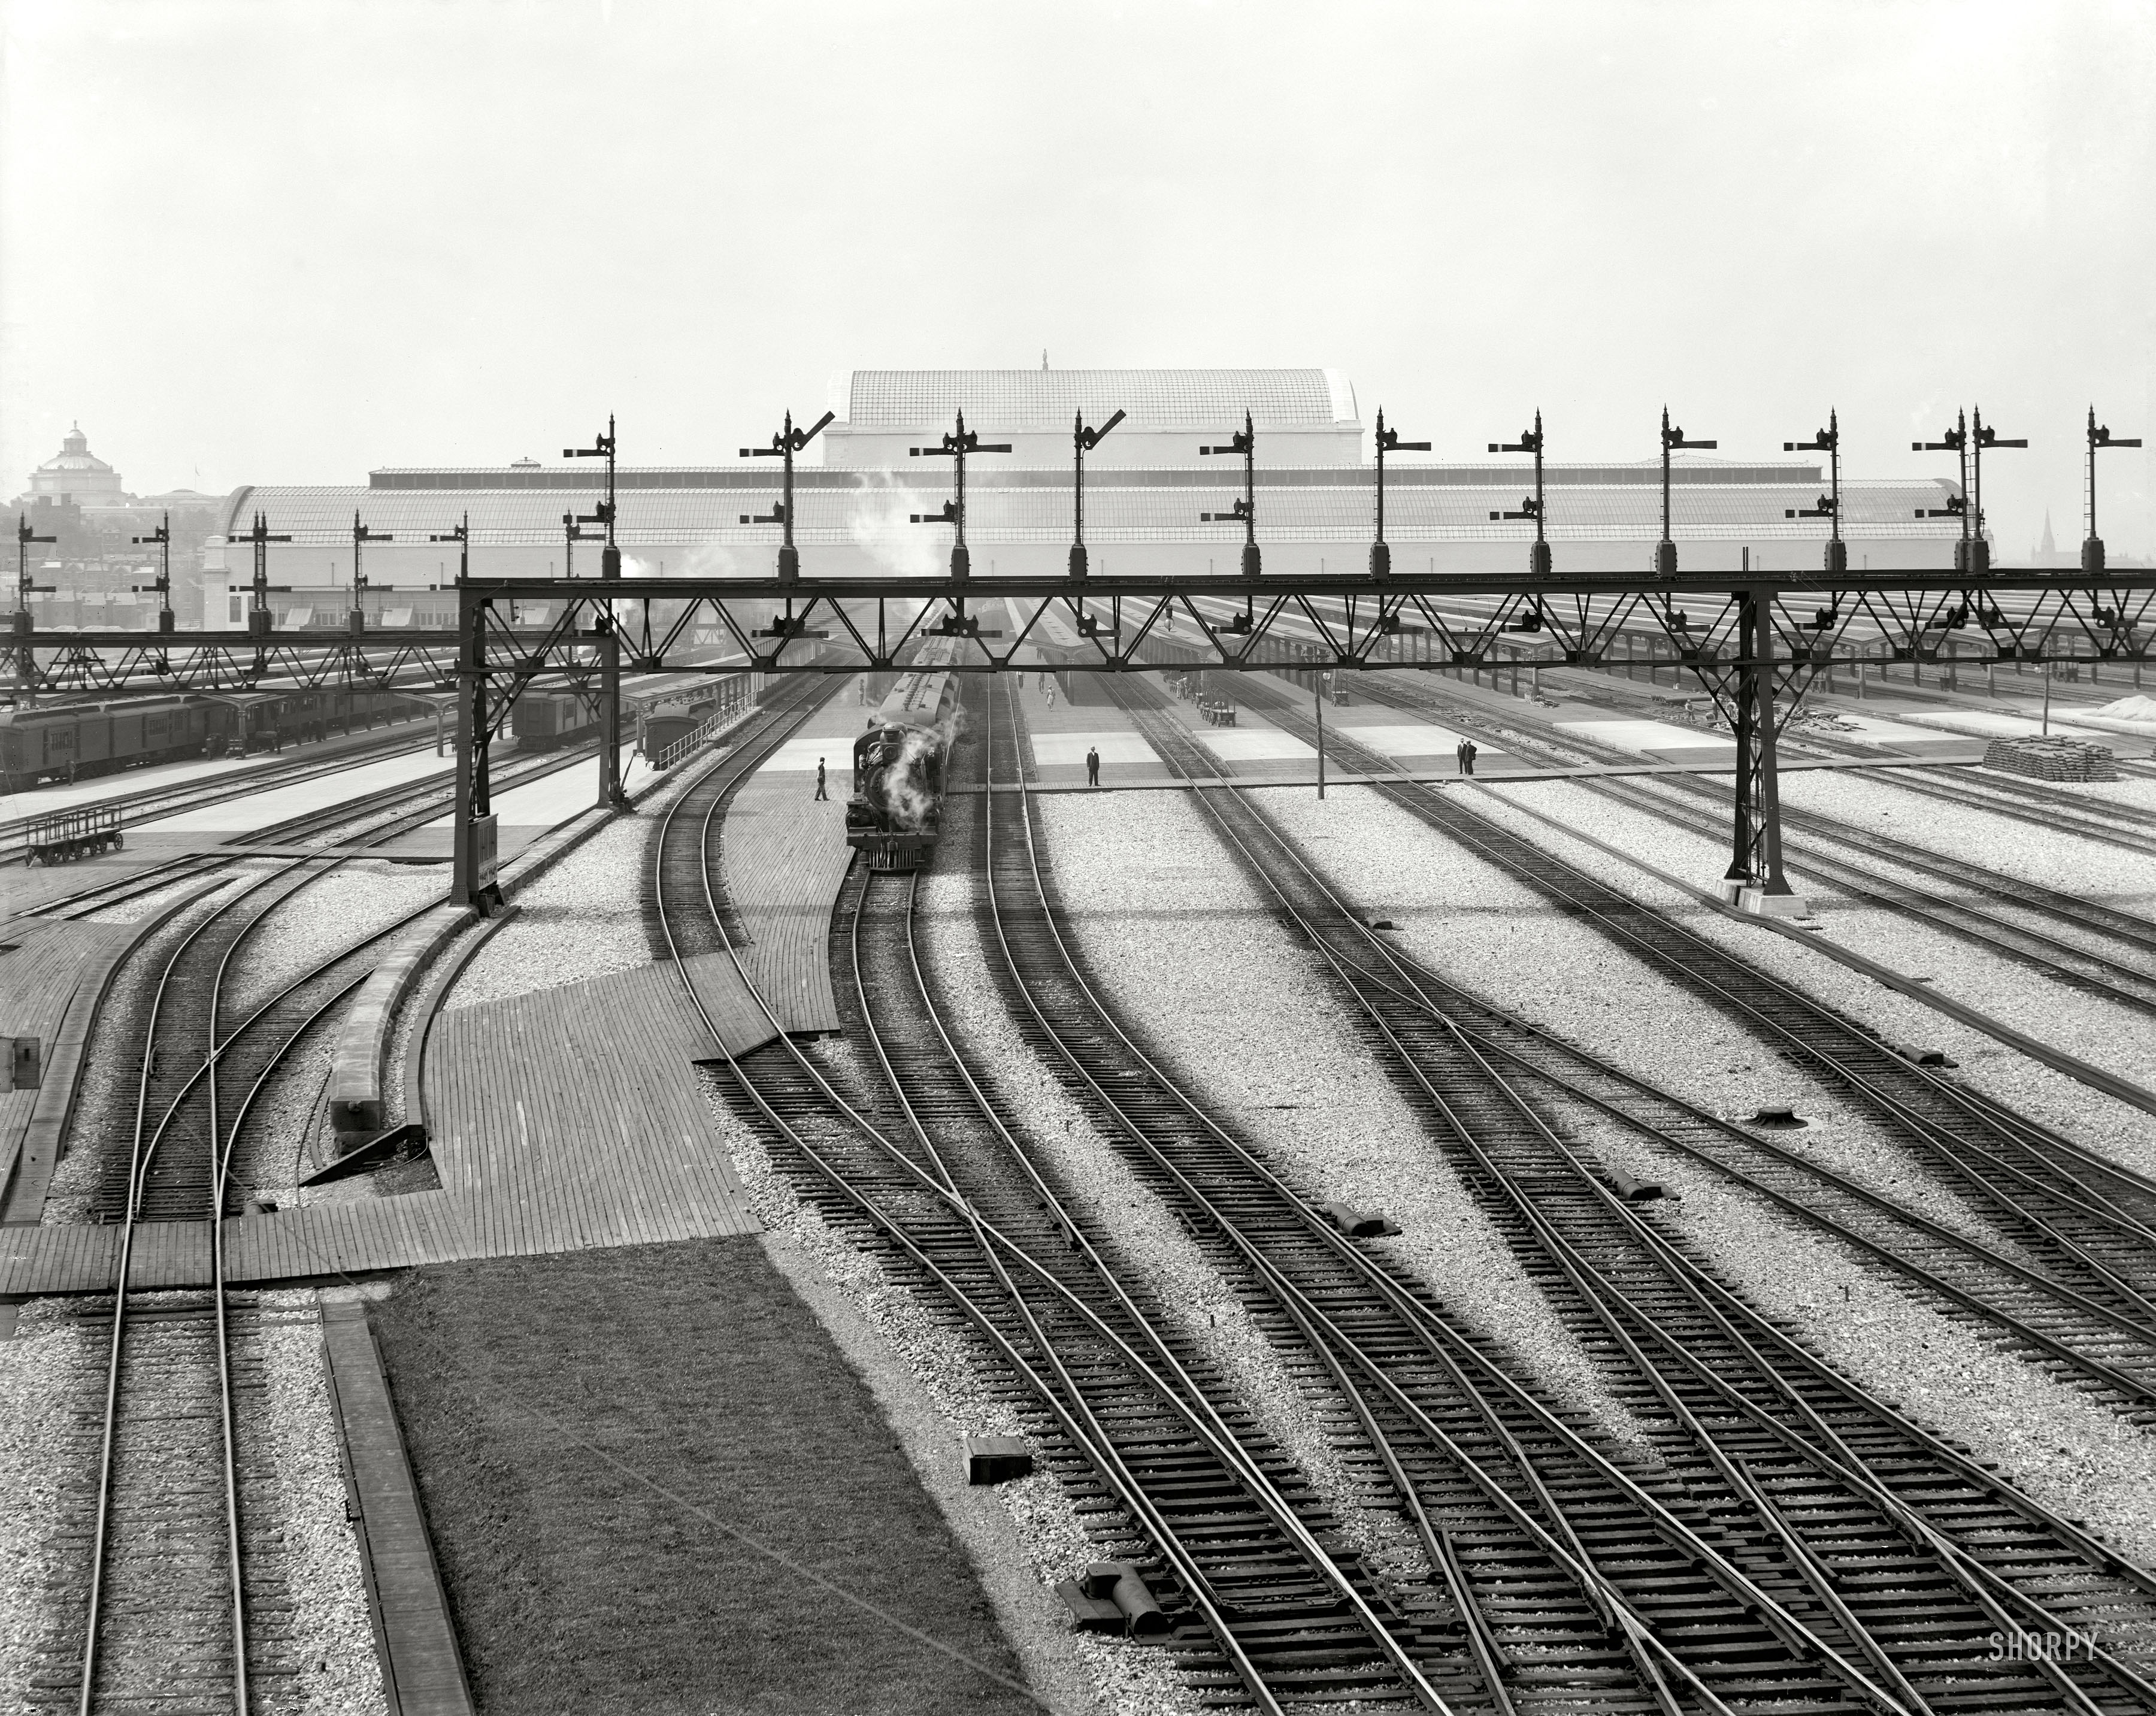 Washington, D.C., circa 1908. "Switch yards, Union Station." Tracks last seen here in April, back for another glimpse of the well-ordered world a century past. 8x10 inch dry plate glass negative, Detroit Publishing Company. View full size.